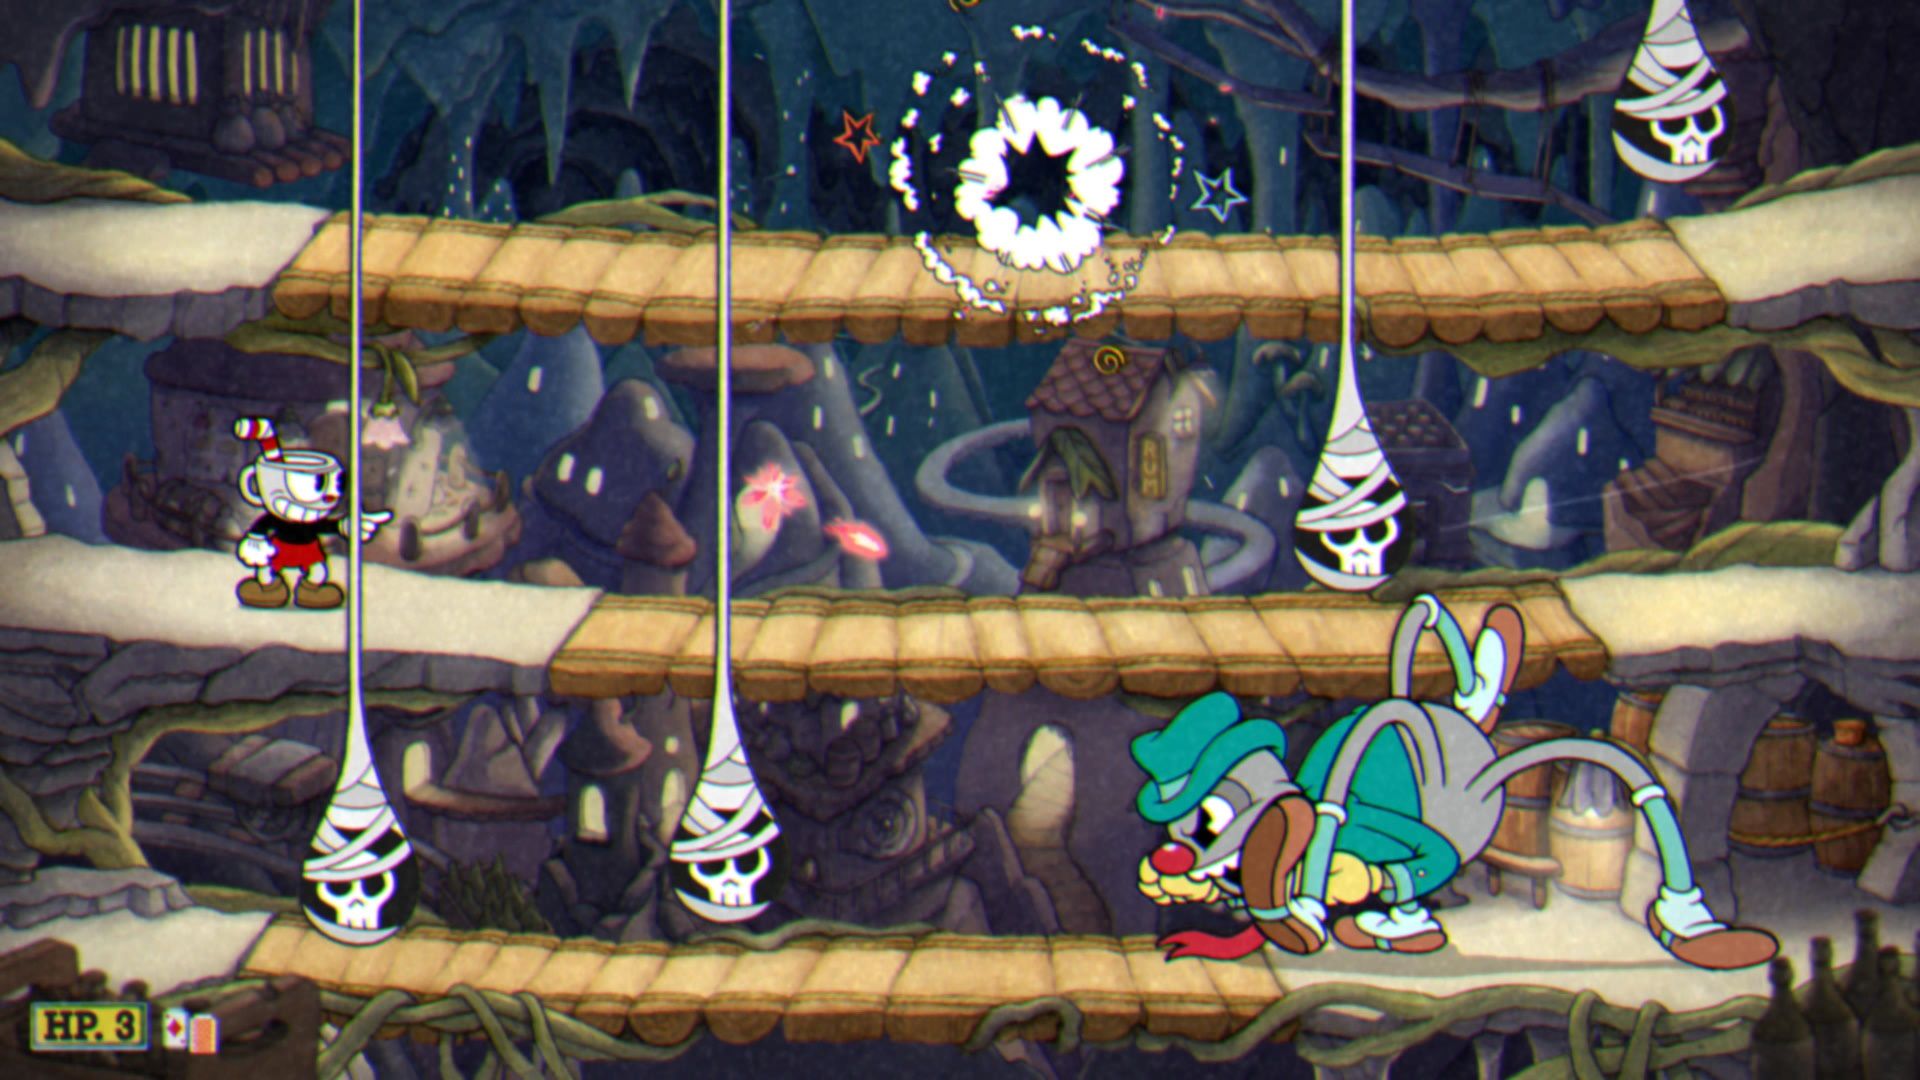 Cuphead The Delicious Course, The Moonshine Mob, Phase 1, Using the Crackshot